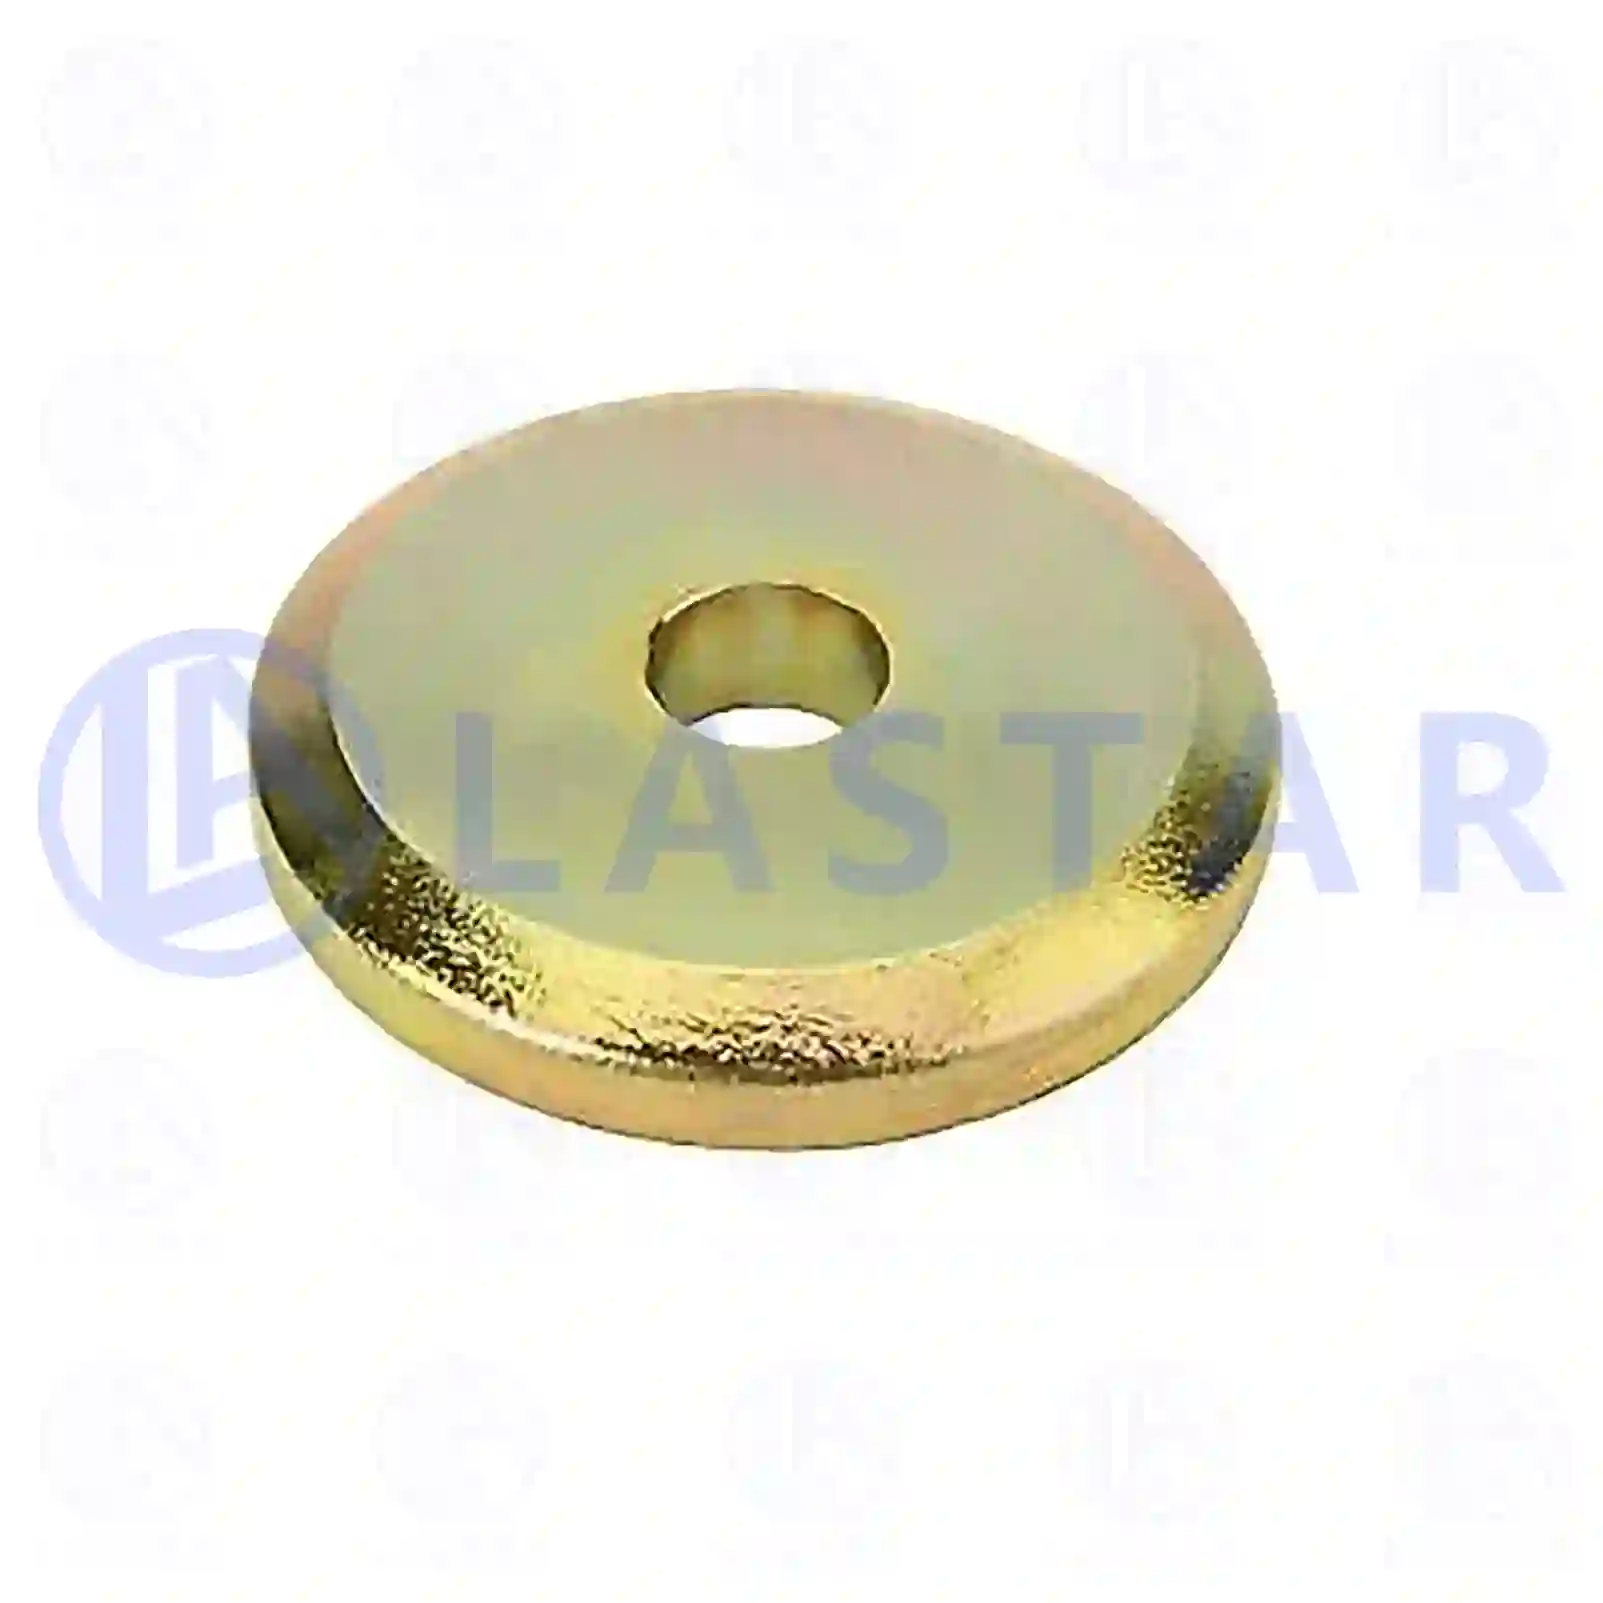 Spacer washer, 77728805, 5010557138, , ||  77728805 Lastar Spare Part | Truck Spare Parts, Auotomotive Spare Parts Spacer washer, 77728805, 5010557138, , ||  77728805 Lastar Spare Part | Truck Spare Parts, Auotomotive Spare Parts